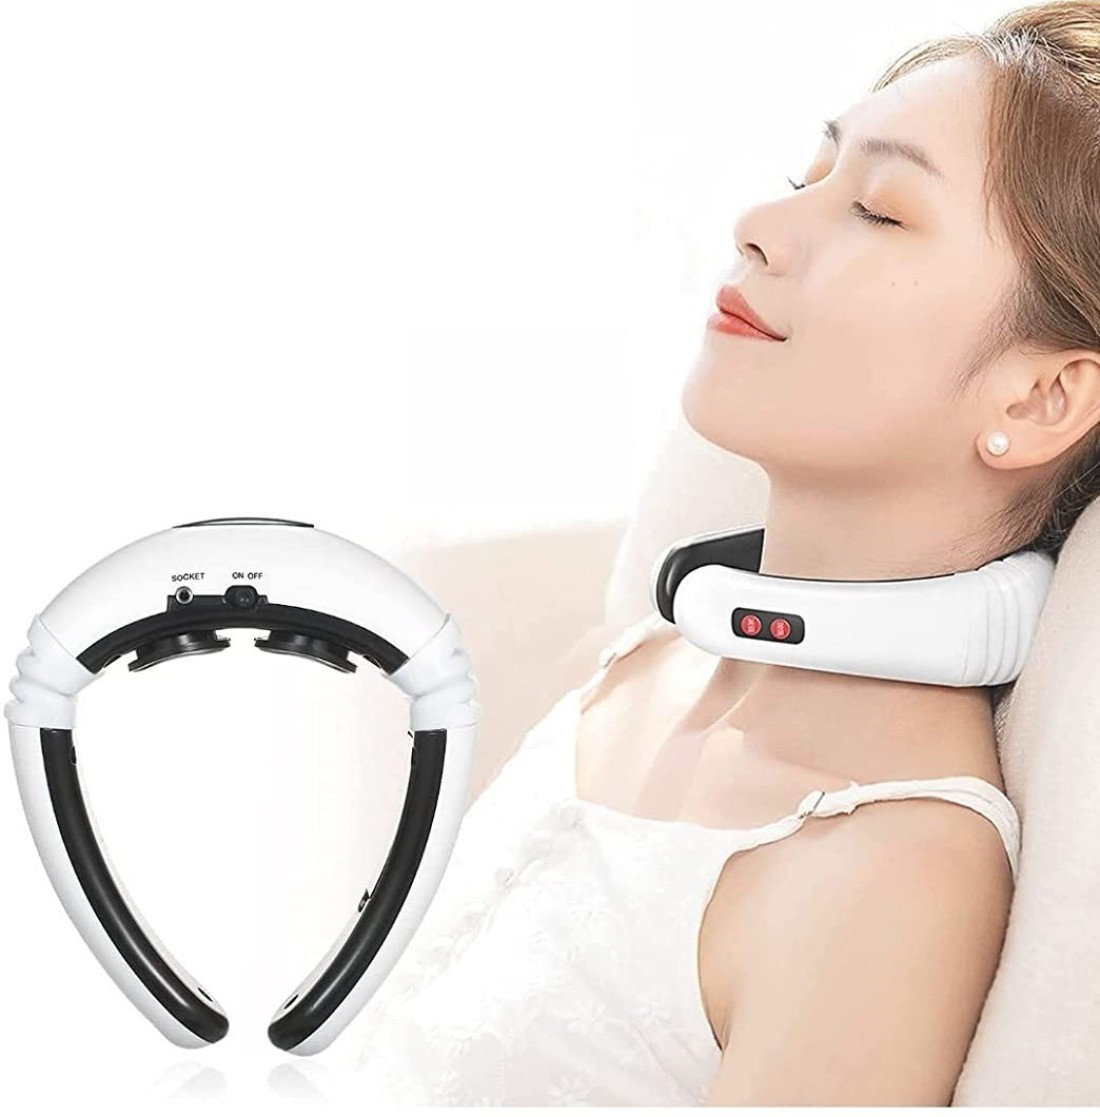 Magnetherapy Electric Pulse Magnetic Therapy Neck Massager